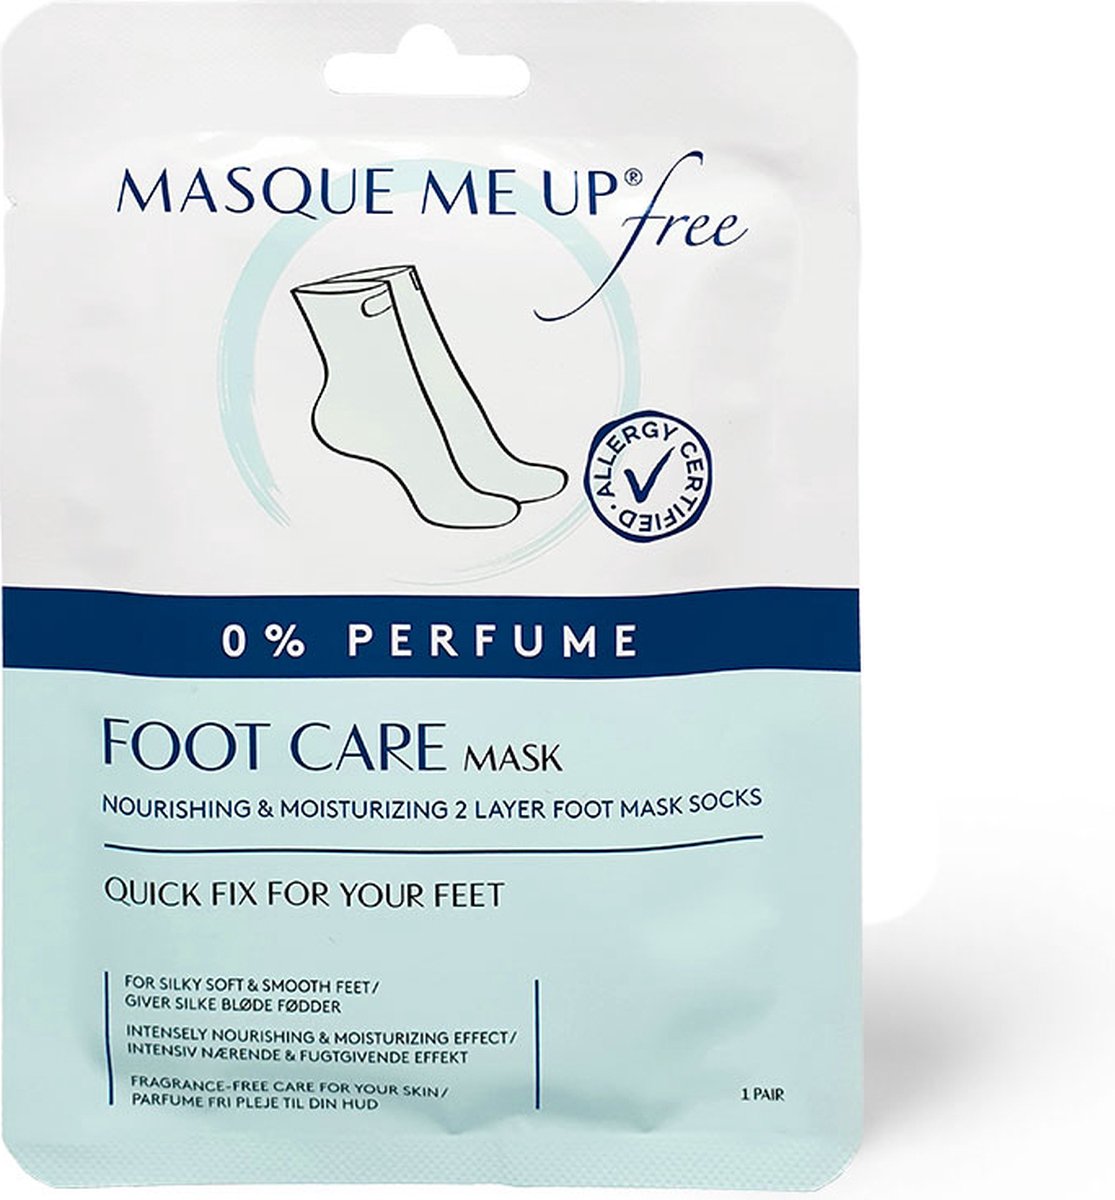 Masque me up Free - Foot Care Mask Socks